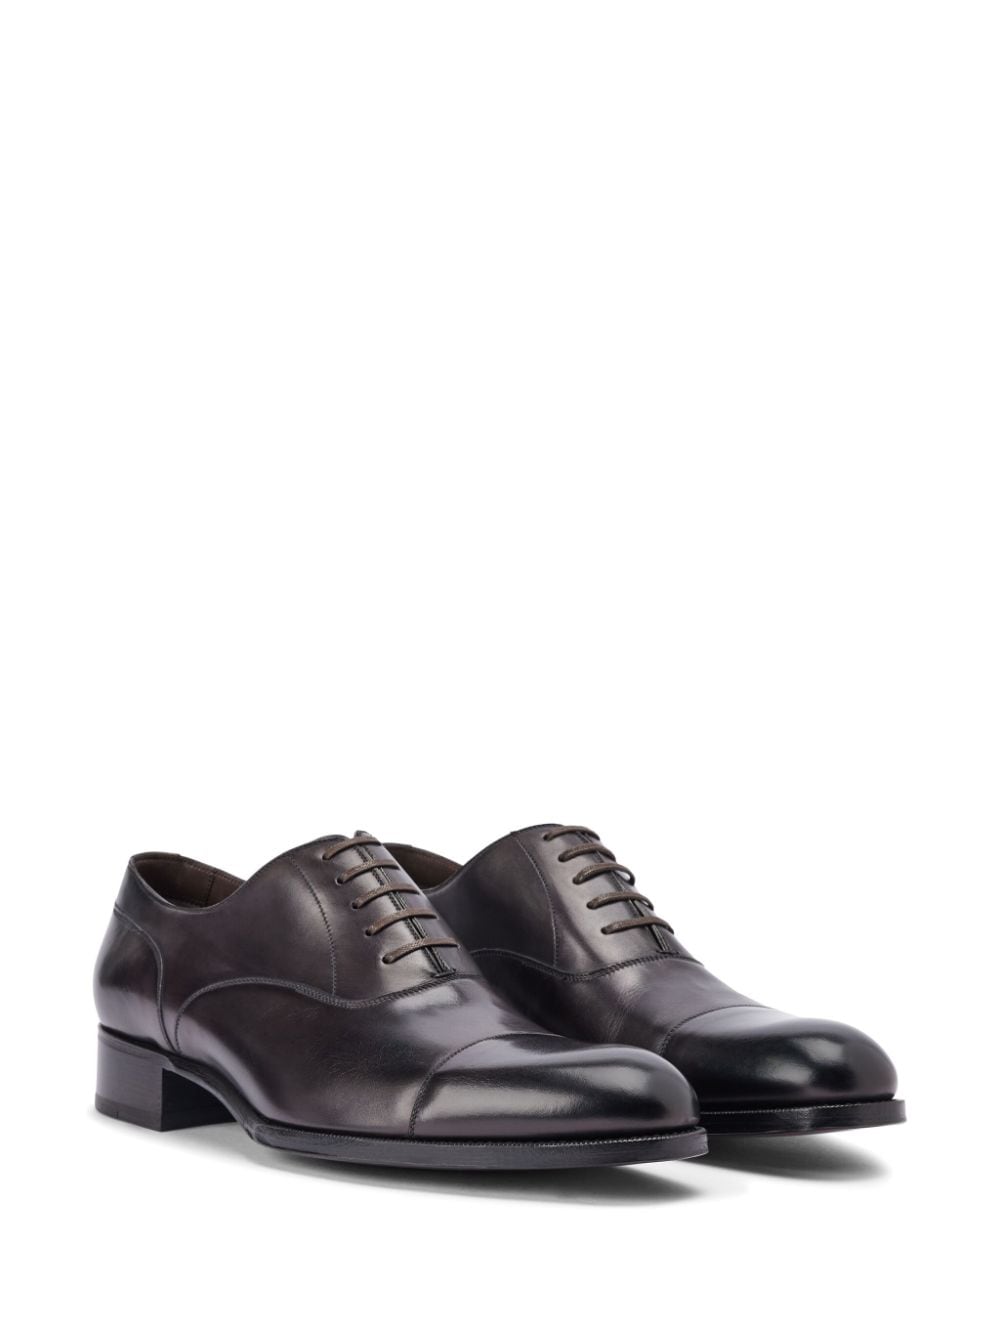 TOM FORD leather Oxford shoes - Bruin